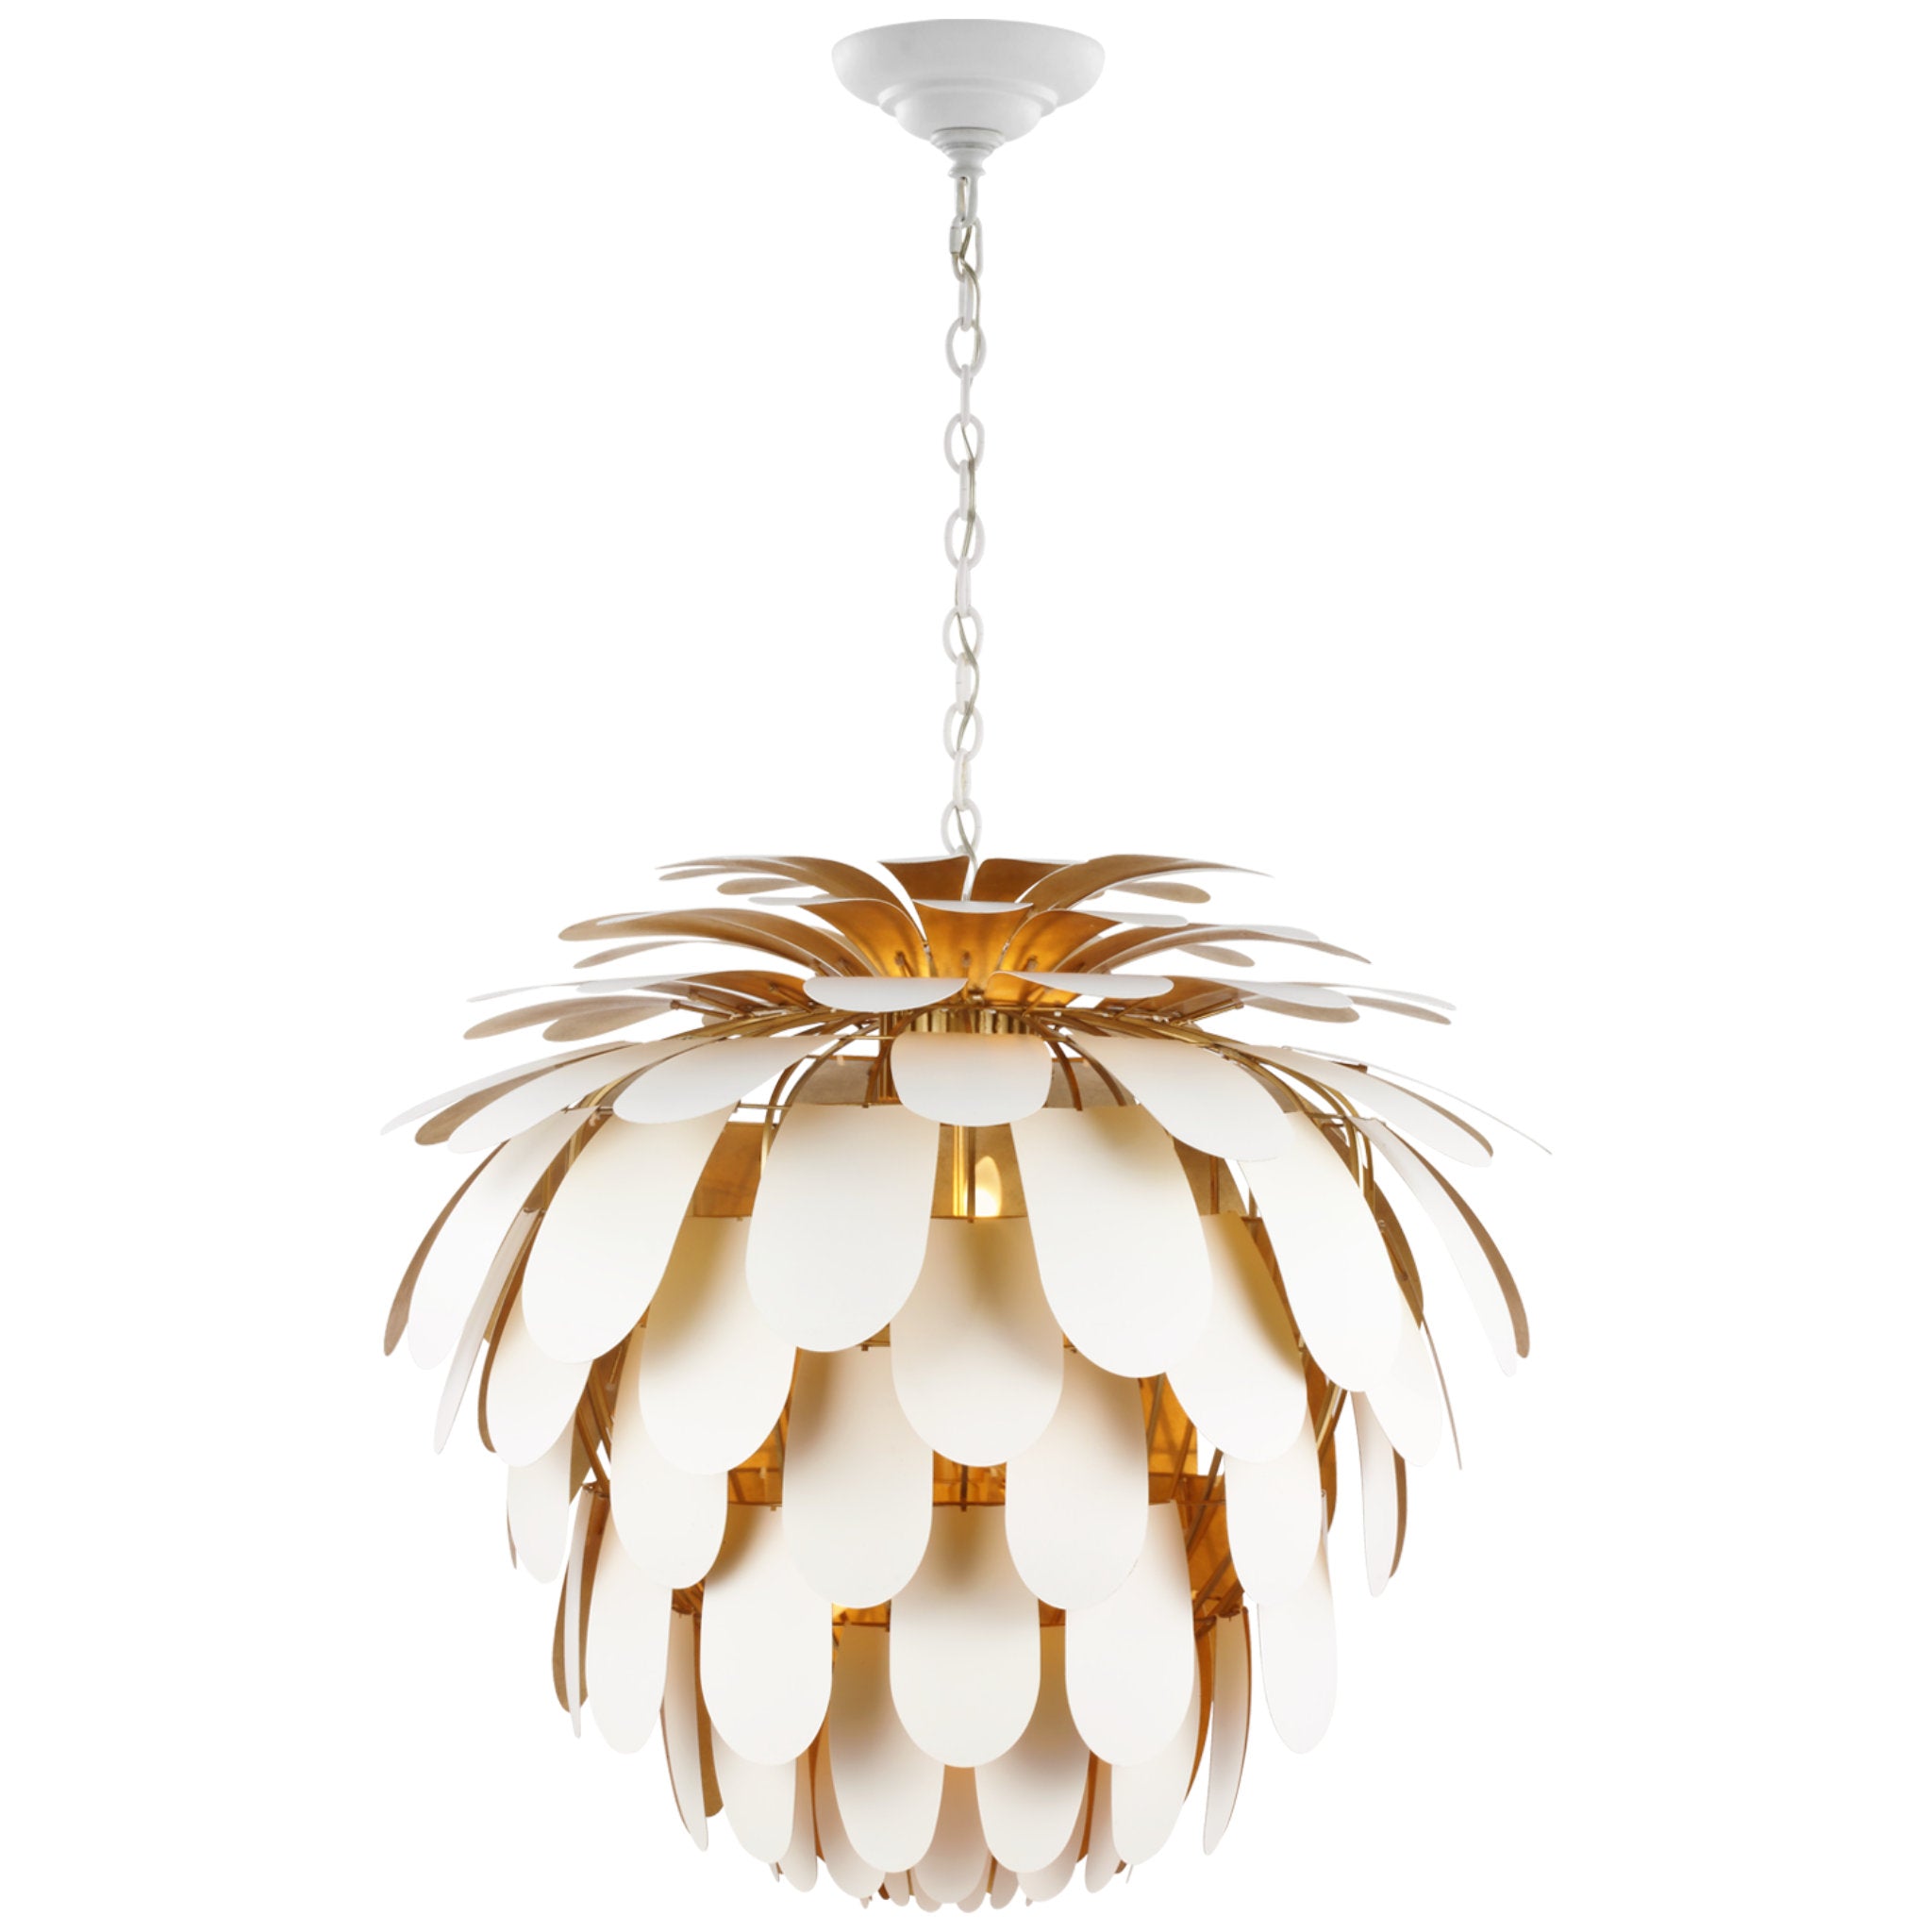 Chapman & Myers Cynara Grande Chandelier in White and Gild